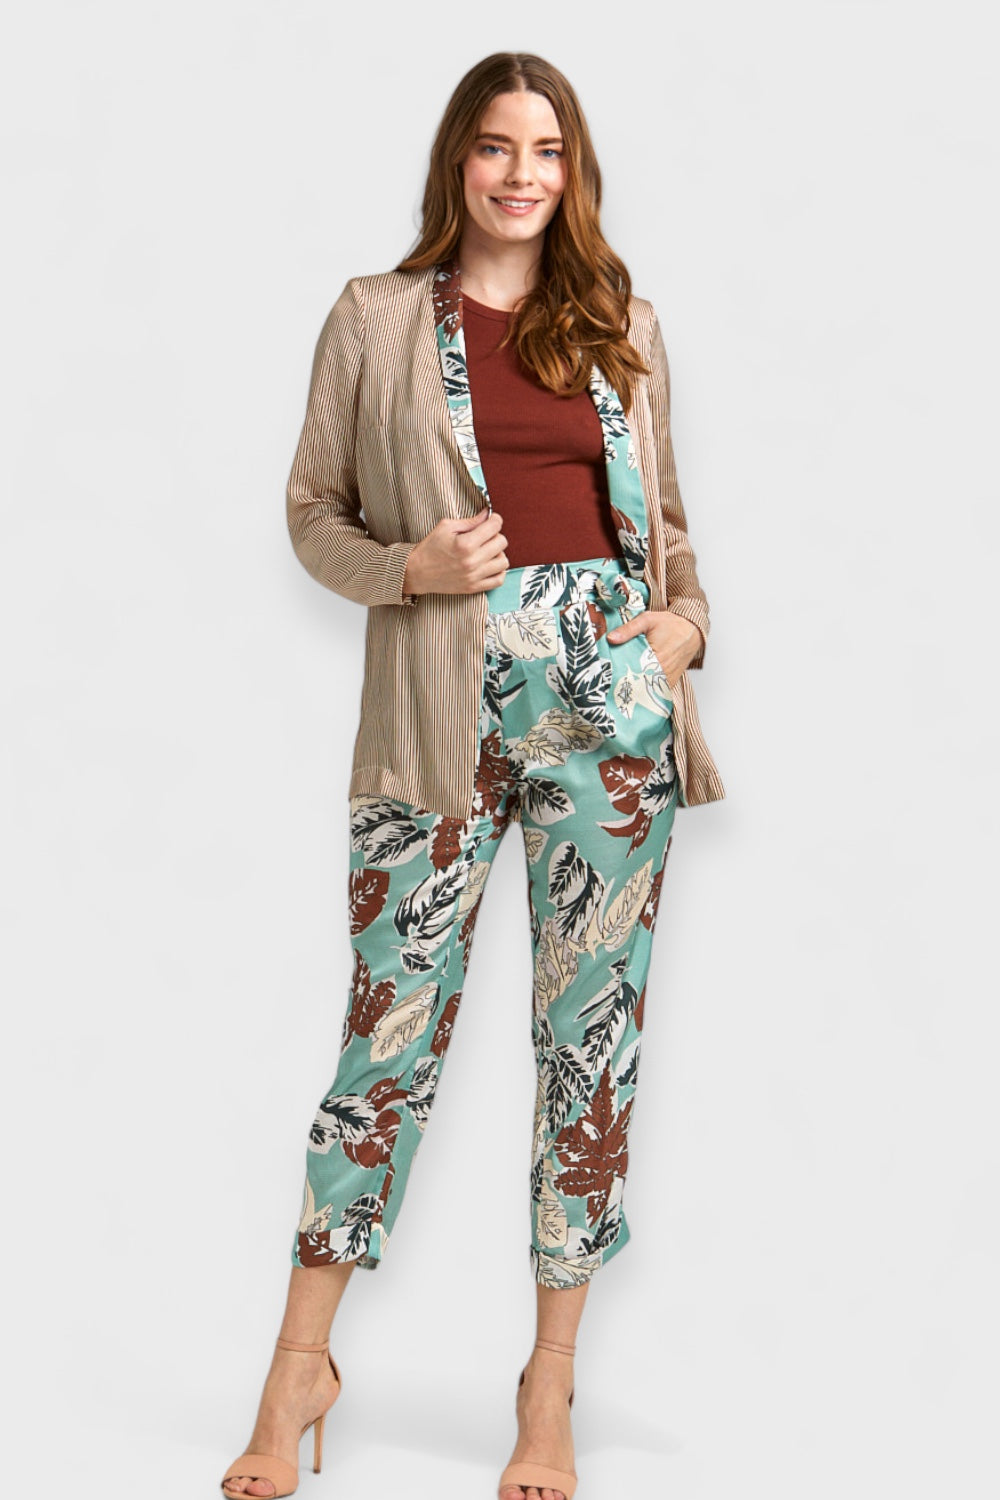 Vera Relaxed Floral Print Collar Striped Blazer by AnnaCristy Milano Italian Women's Clothing Paired with Anna Floral Satin Pants